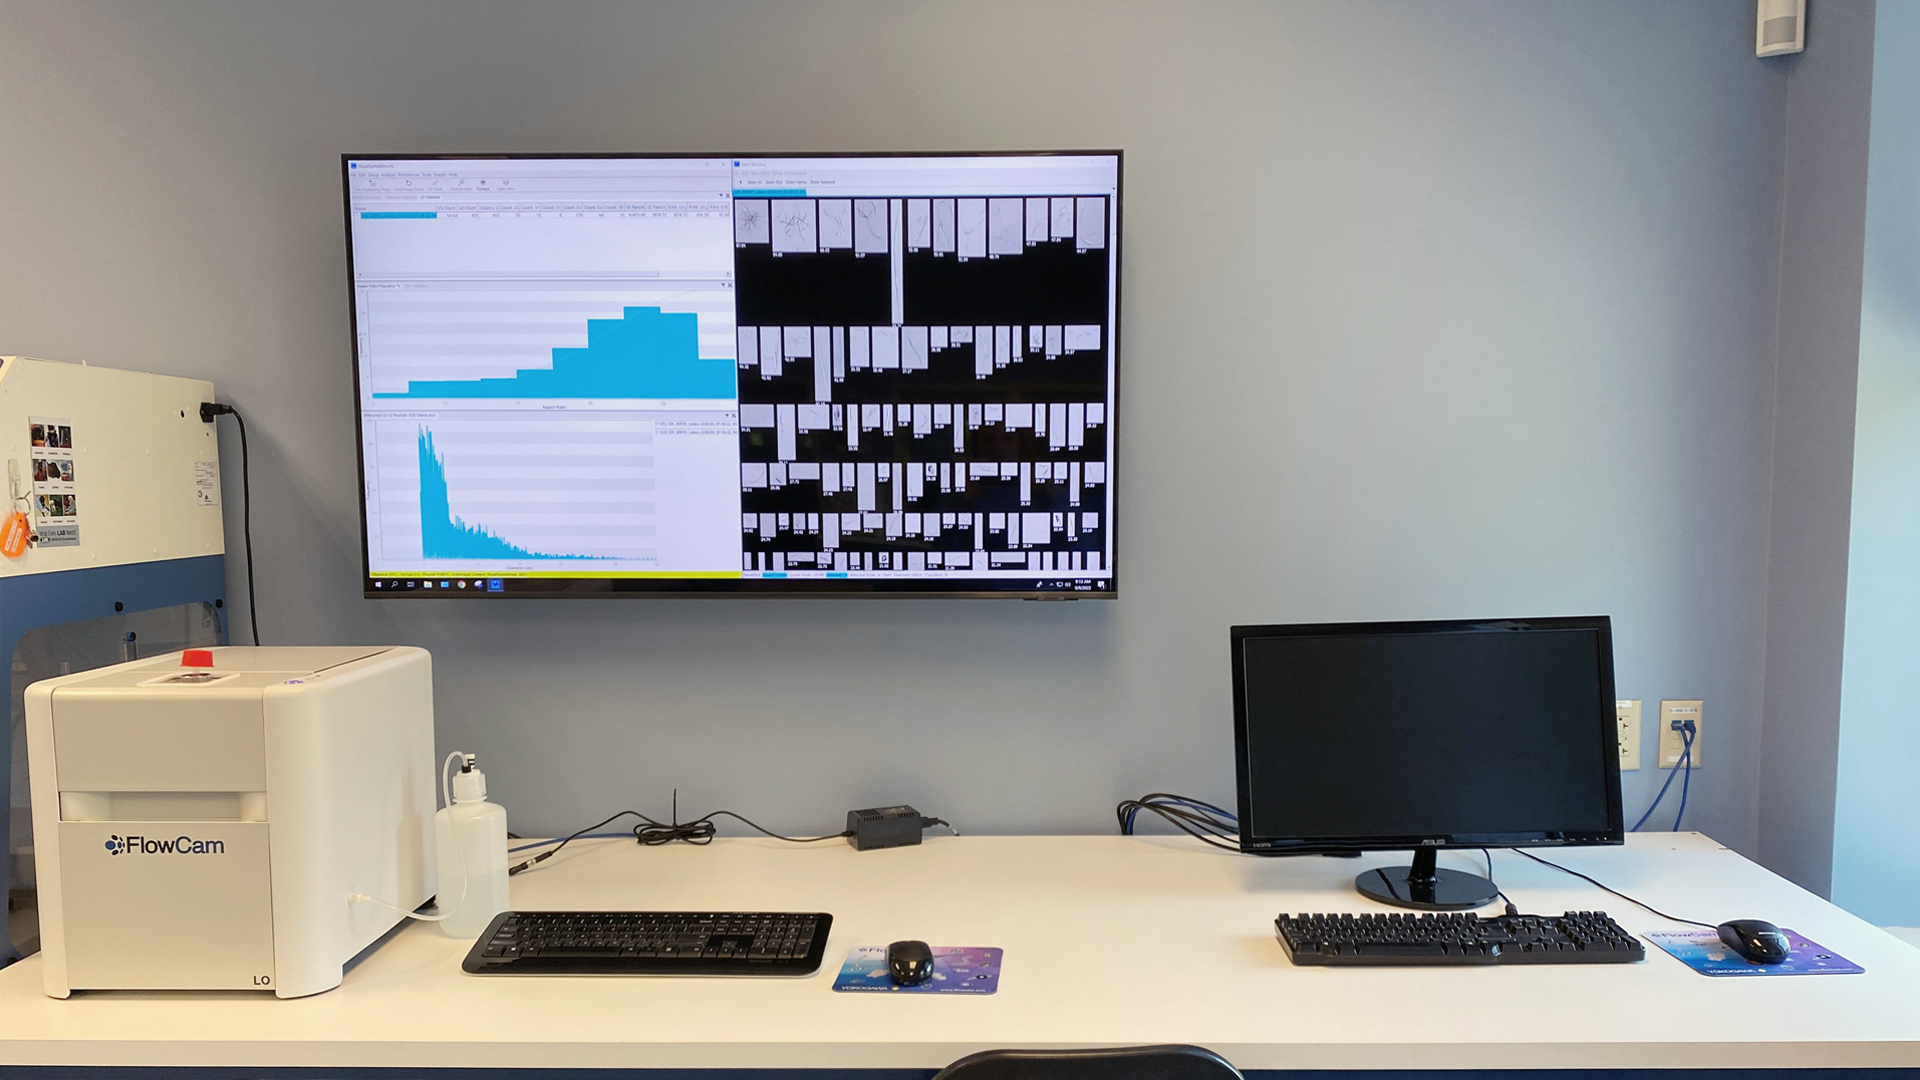 FlowCam on lab bench with data showing on screen